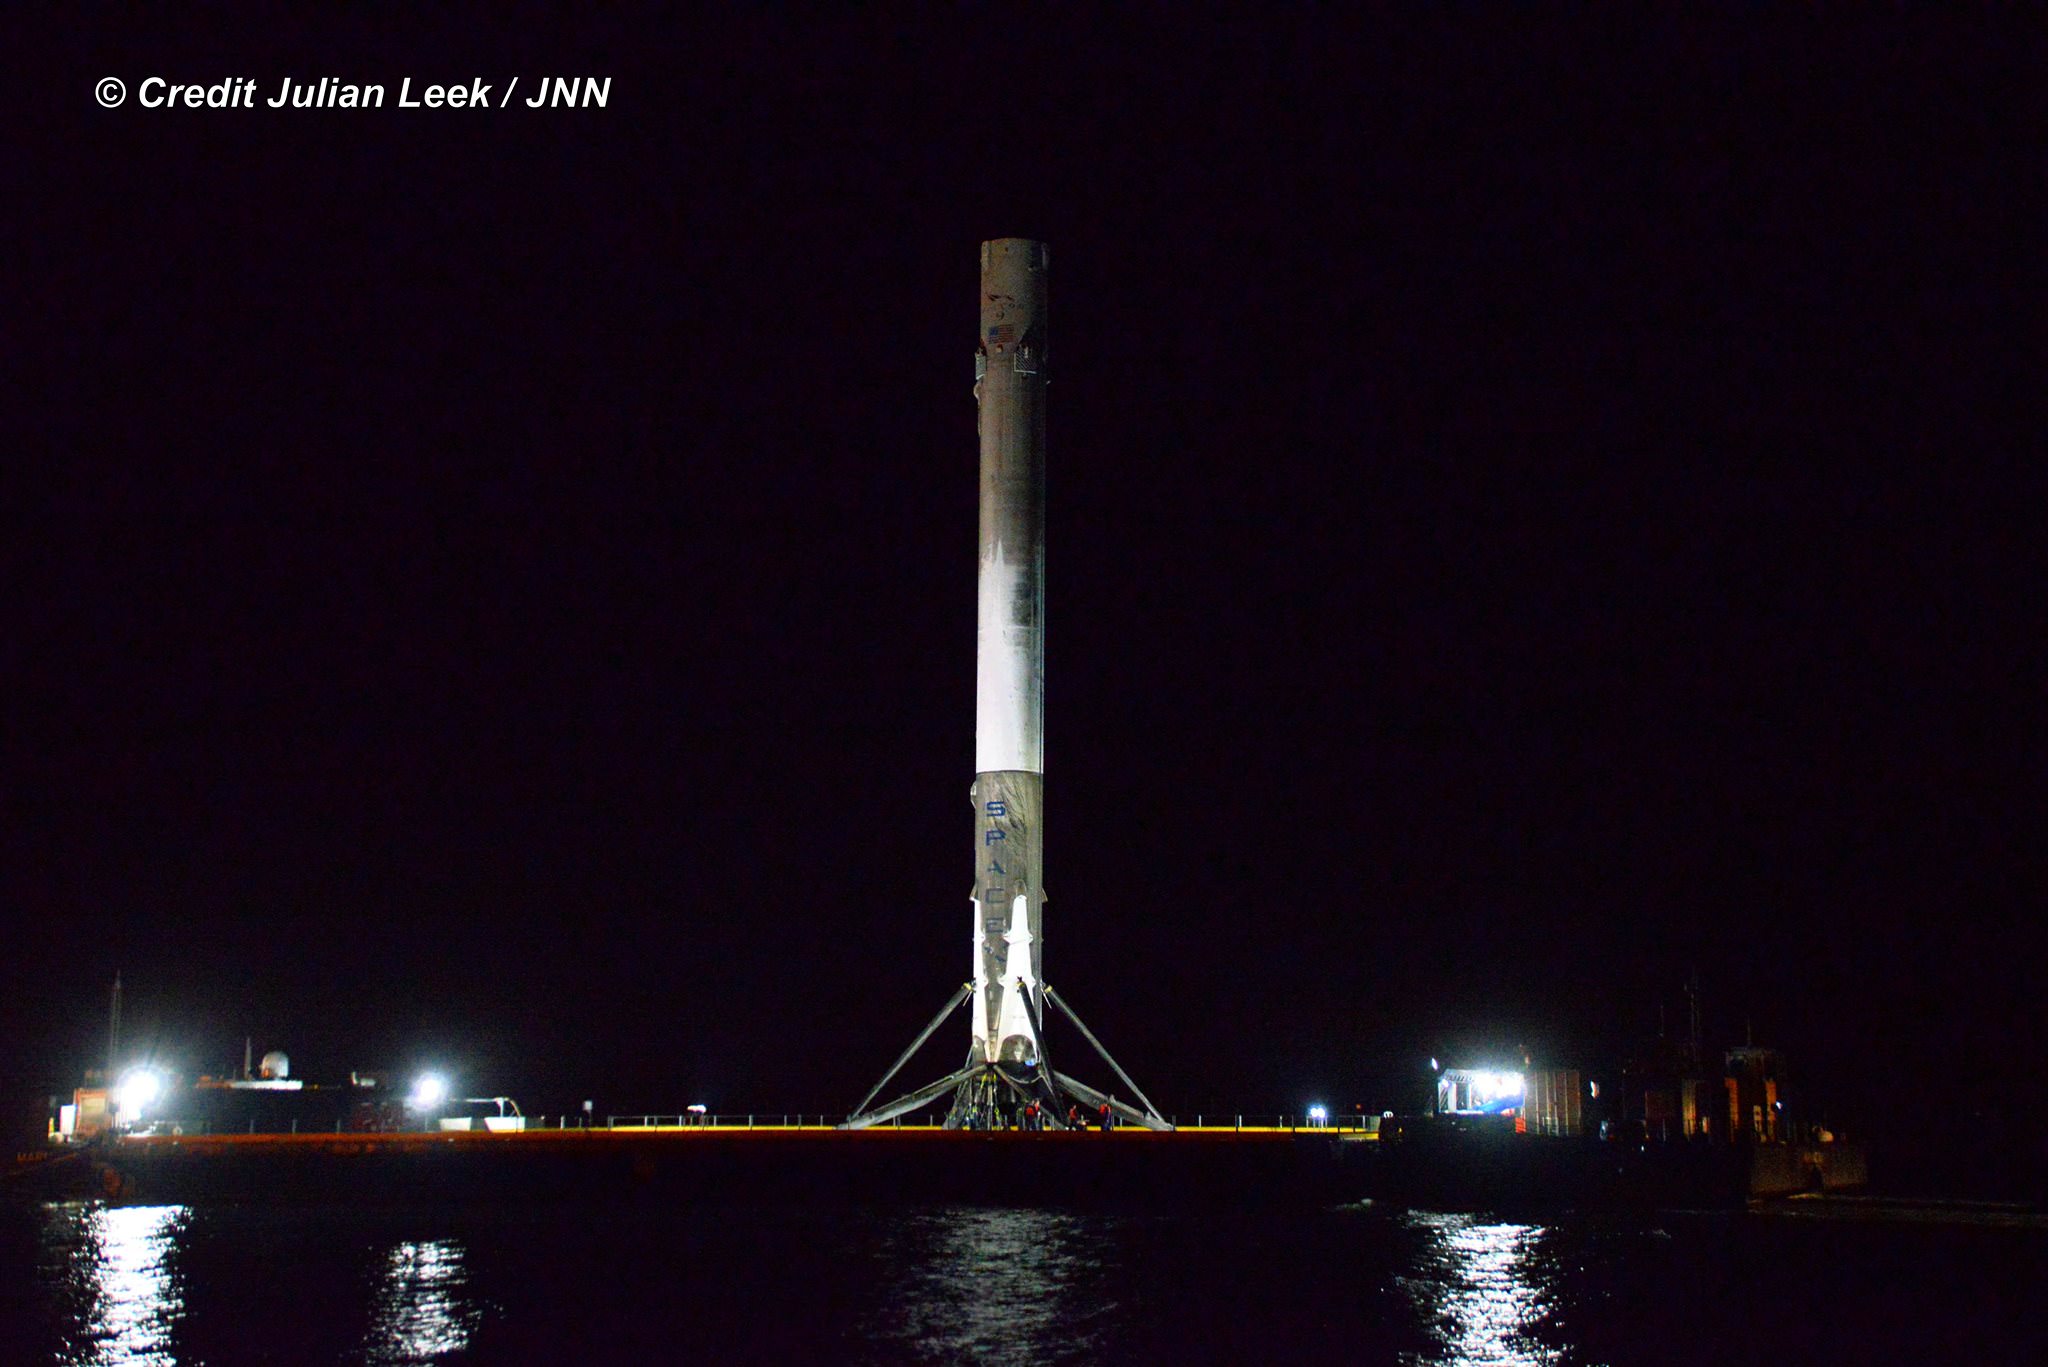 Recovered SpaceX Falcon 9 rocket arrives back in port overnight at Port Canaveral, Florida on April 12, 2016 following successful launch and landing on April 8 from Cape Canaveral Air Force Station.  Credit: Julian Leek